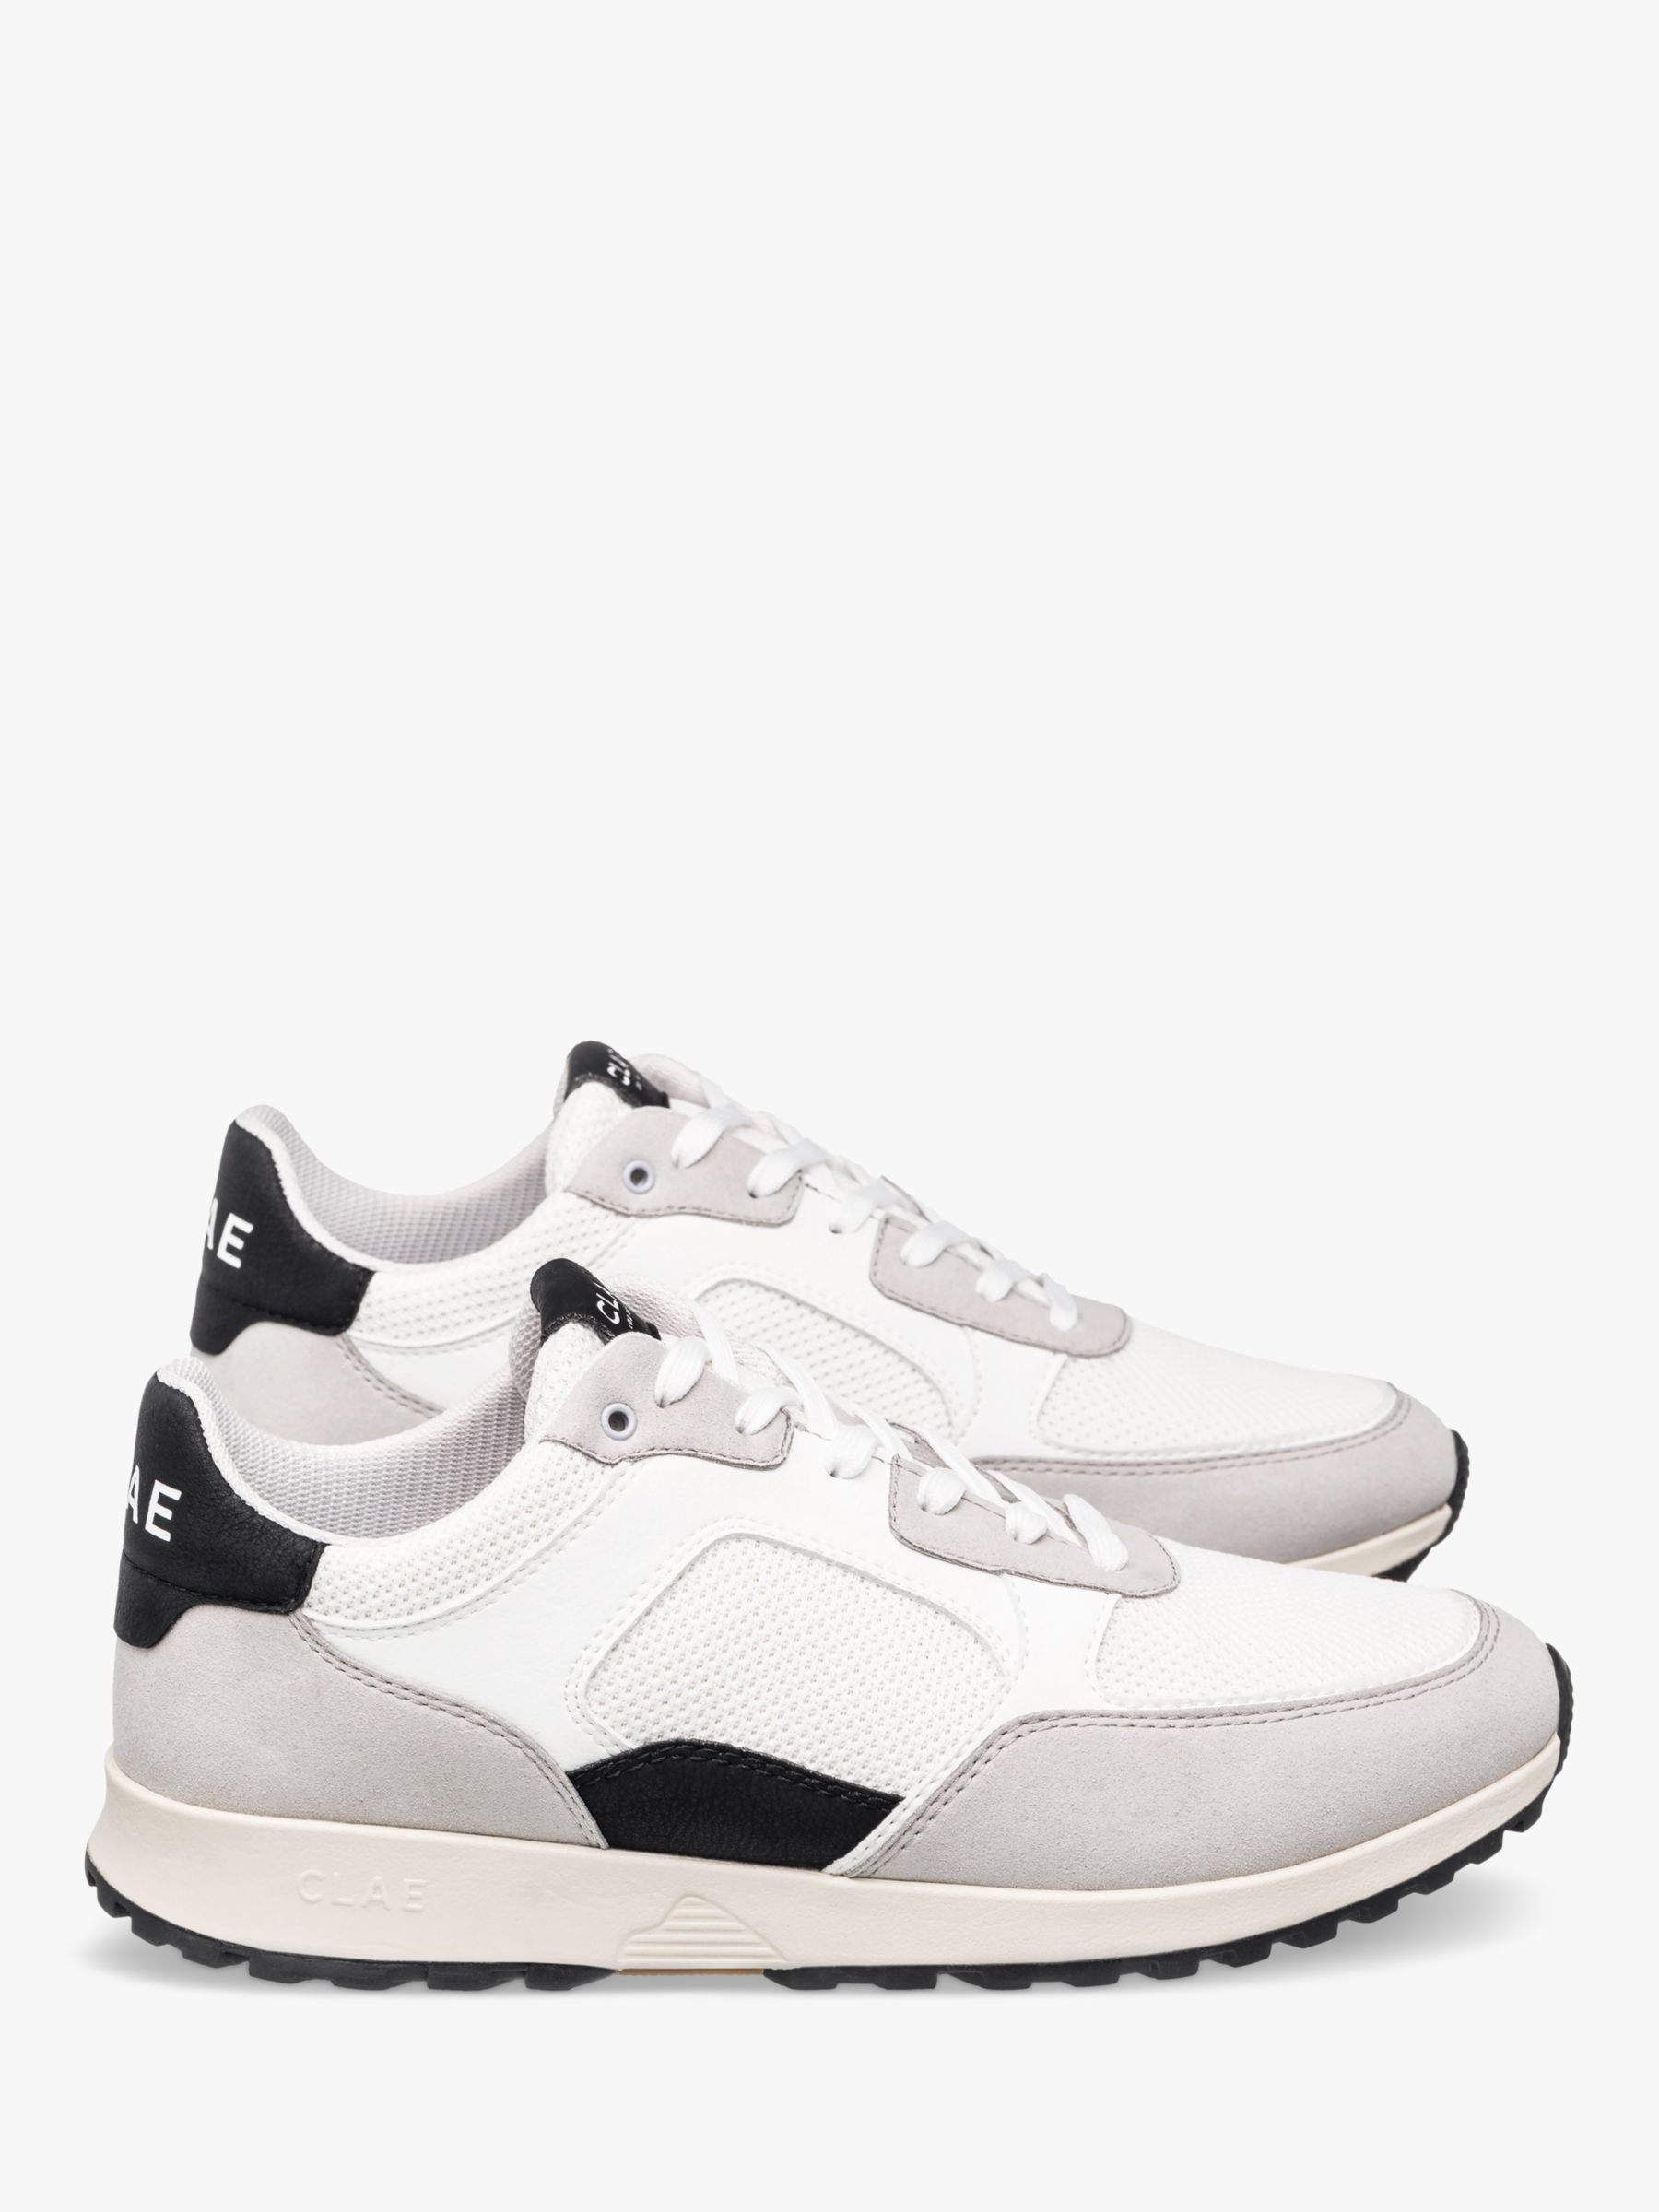 CLAE Joshua Lace Up Trainers, Microchip White/Black at John Lewis ...